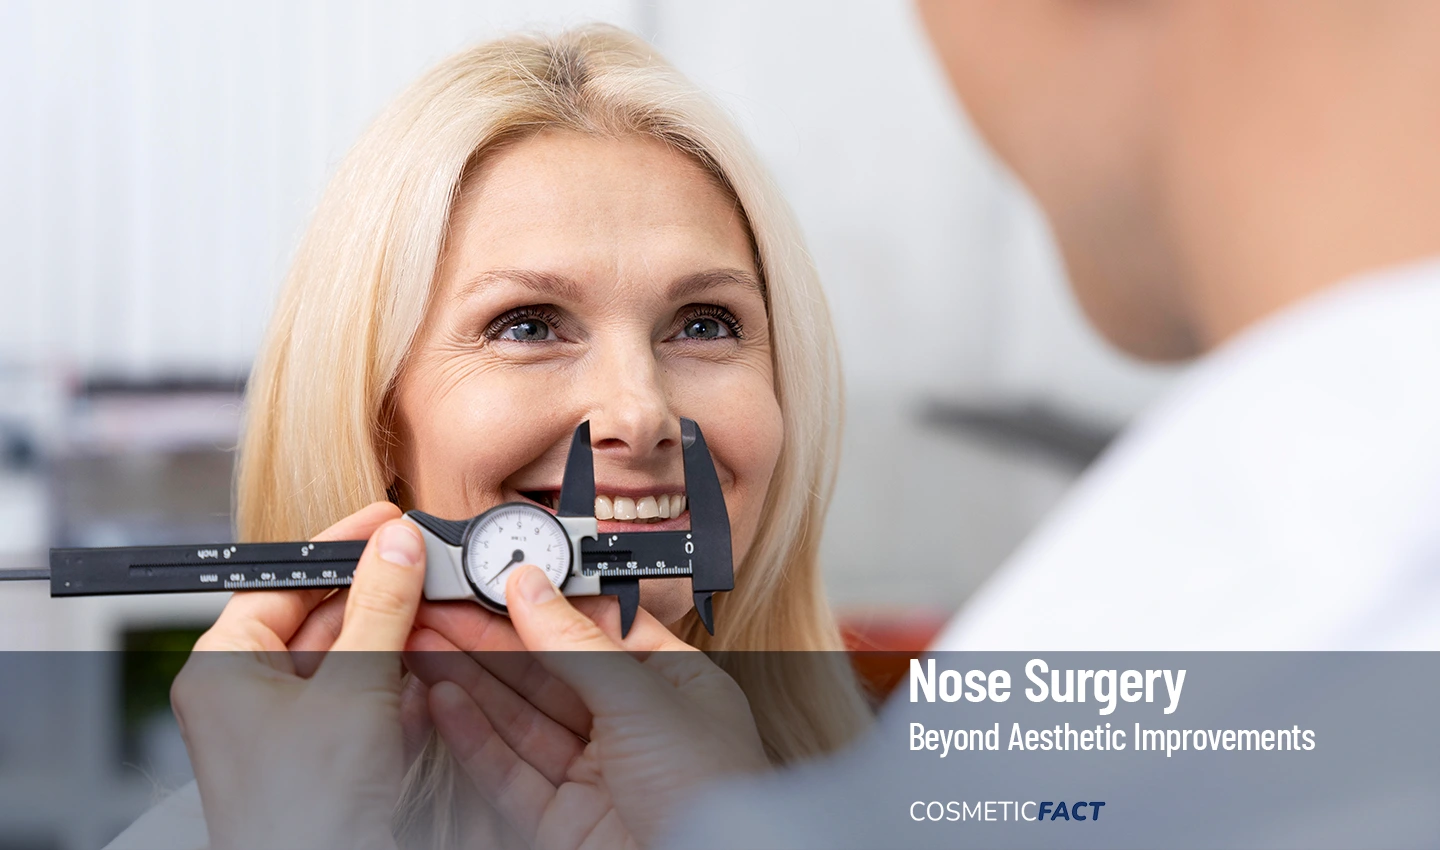 A woman smiling during a rhinoplasty consultation while a plastic surgeon measures her nose width to explore the medical benefits of nose reshaping.